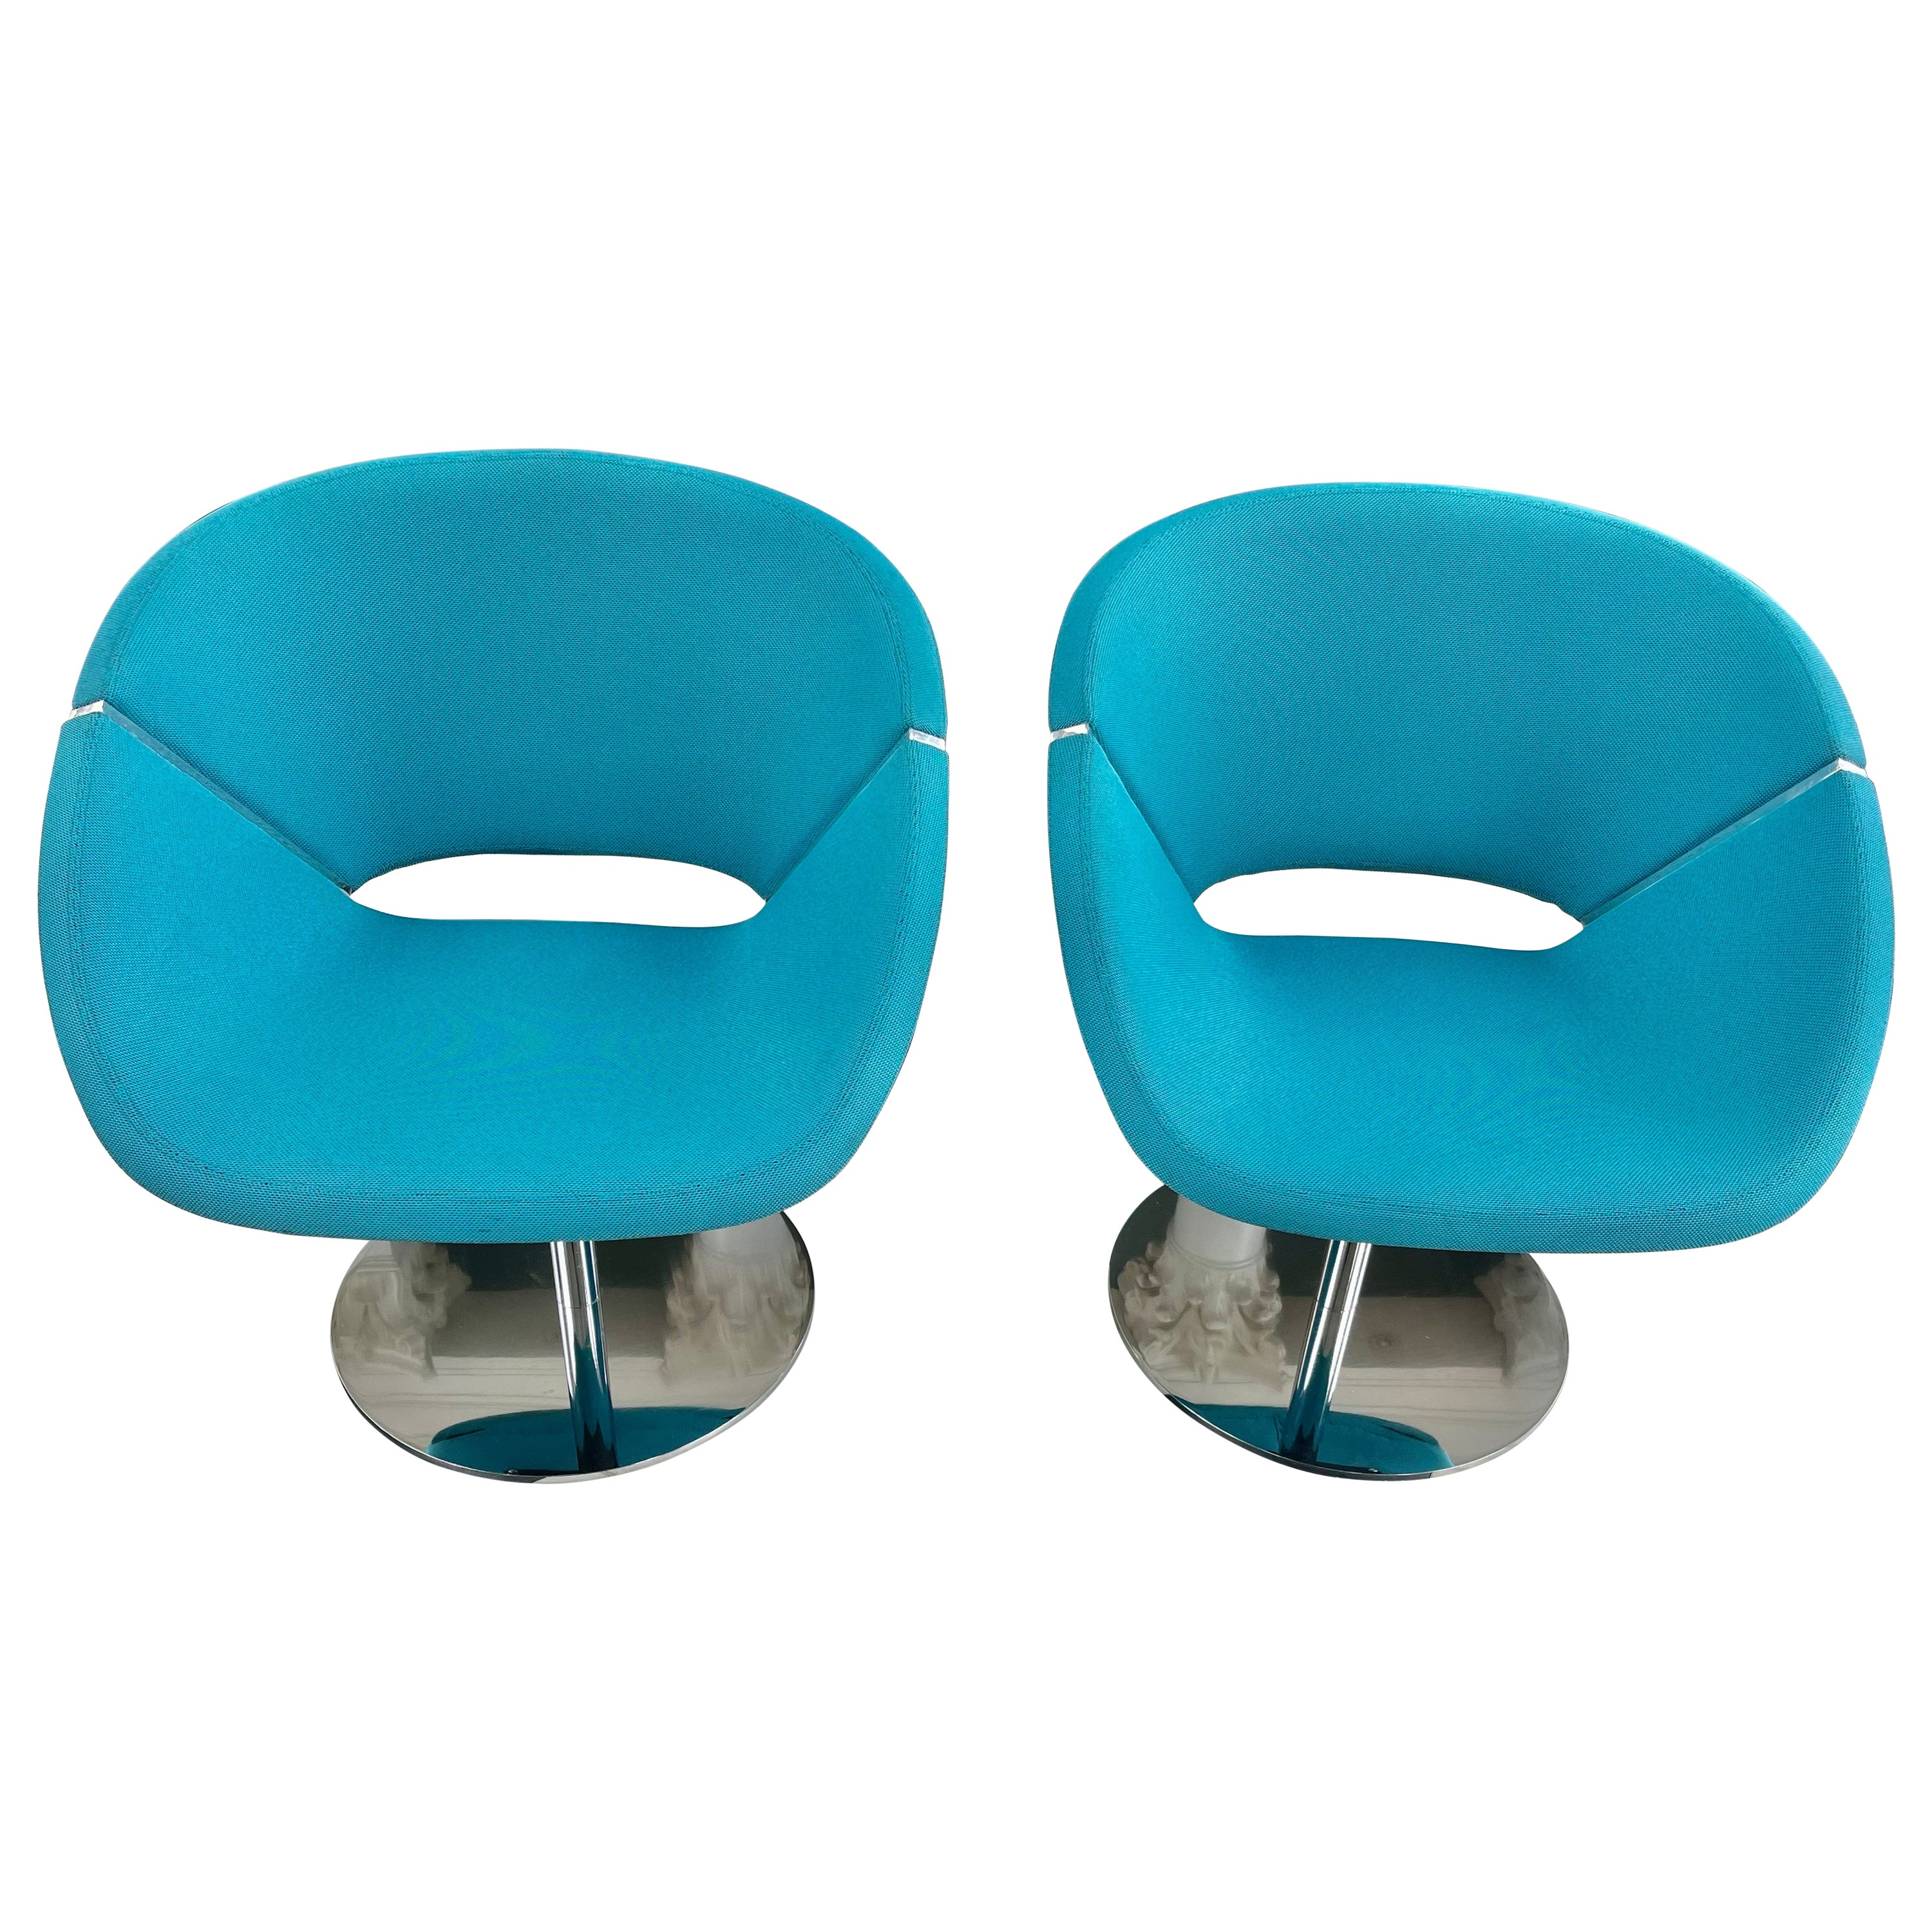 A Pair of “Lipse Too” Lounge Swivel Chairs